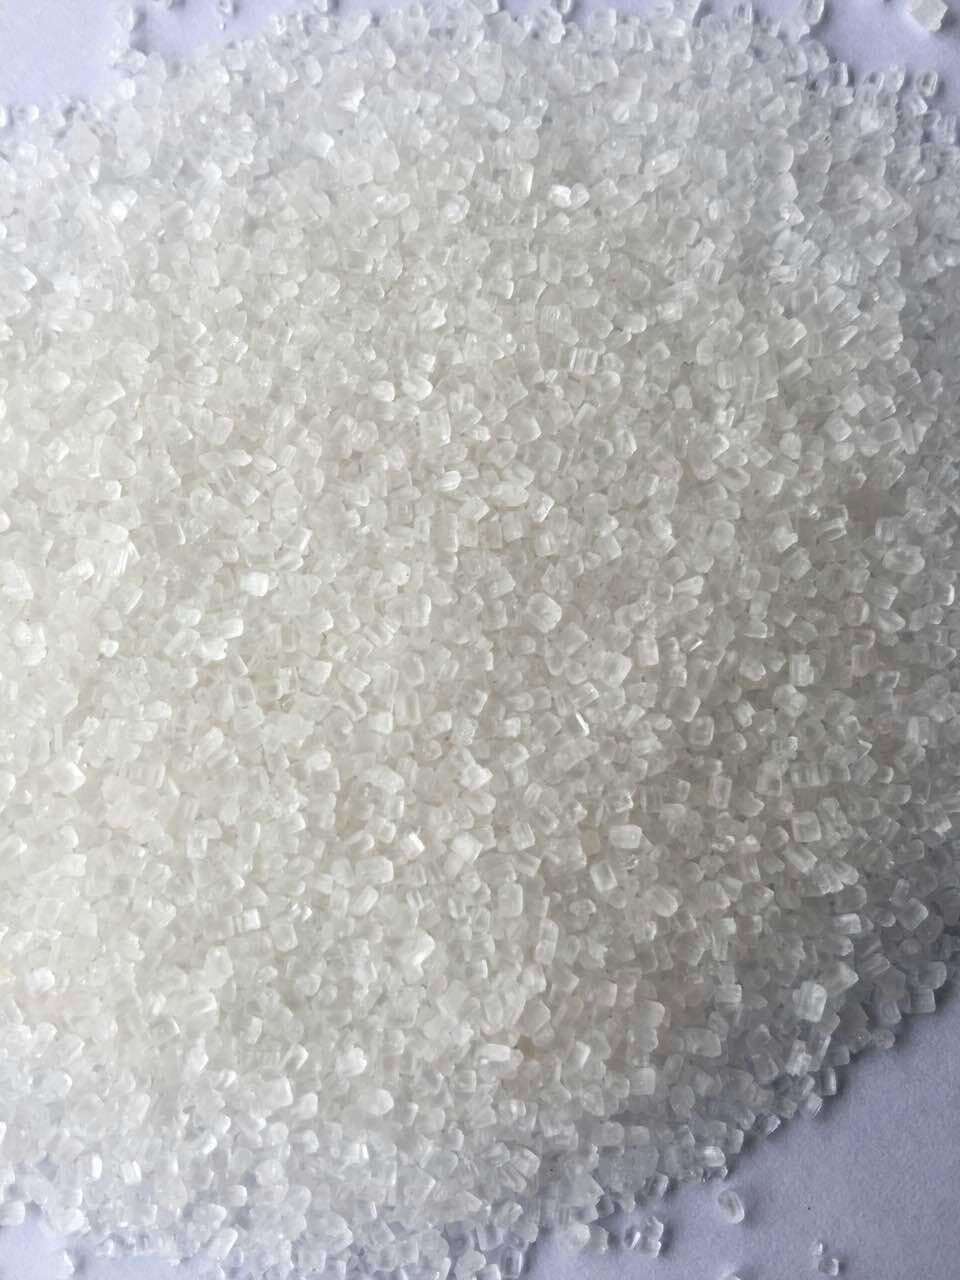 Ammonium Sulphate- (NH4) 2so4 Used for Fertilizer